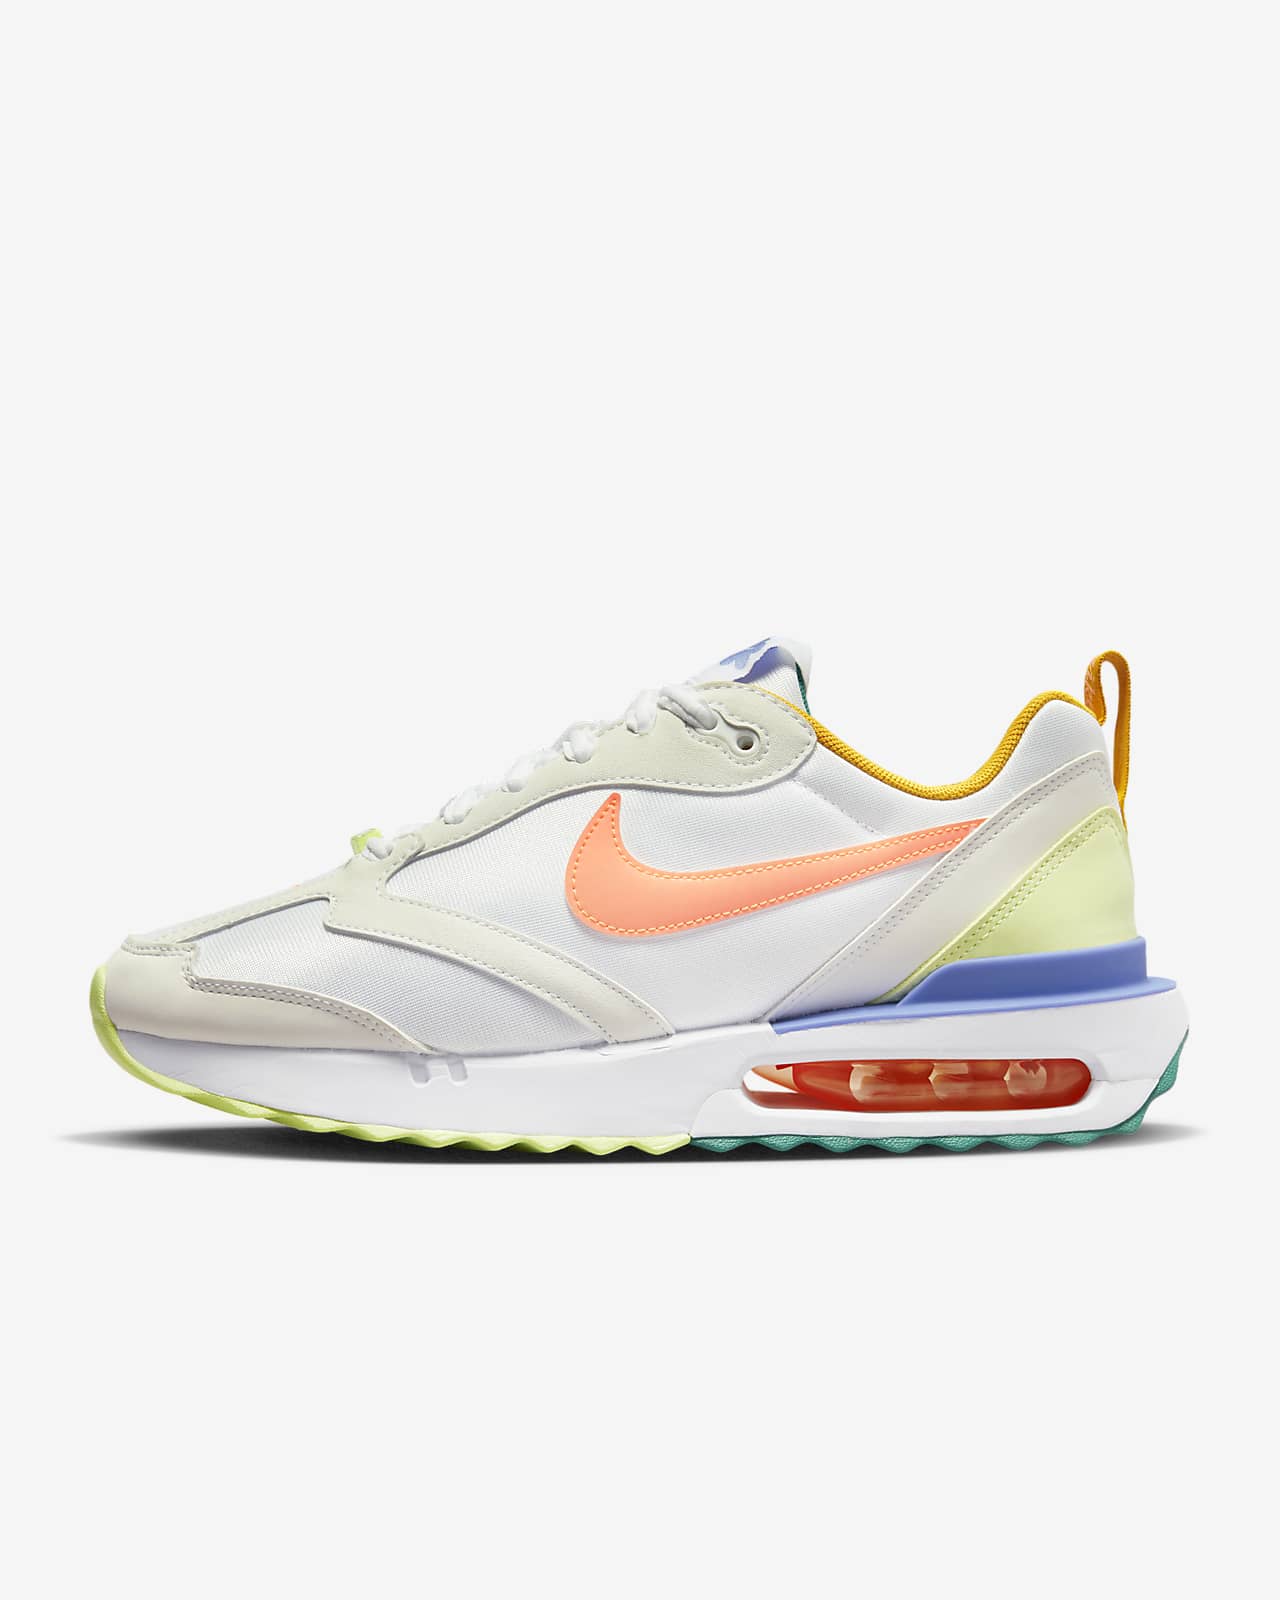 Structurally Hard ring philosopher Nike Air Max Dawn Women's Shoes. Nike.com